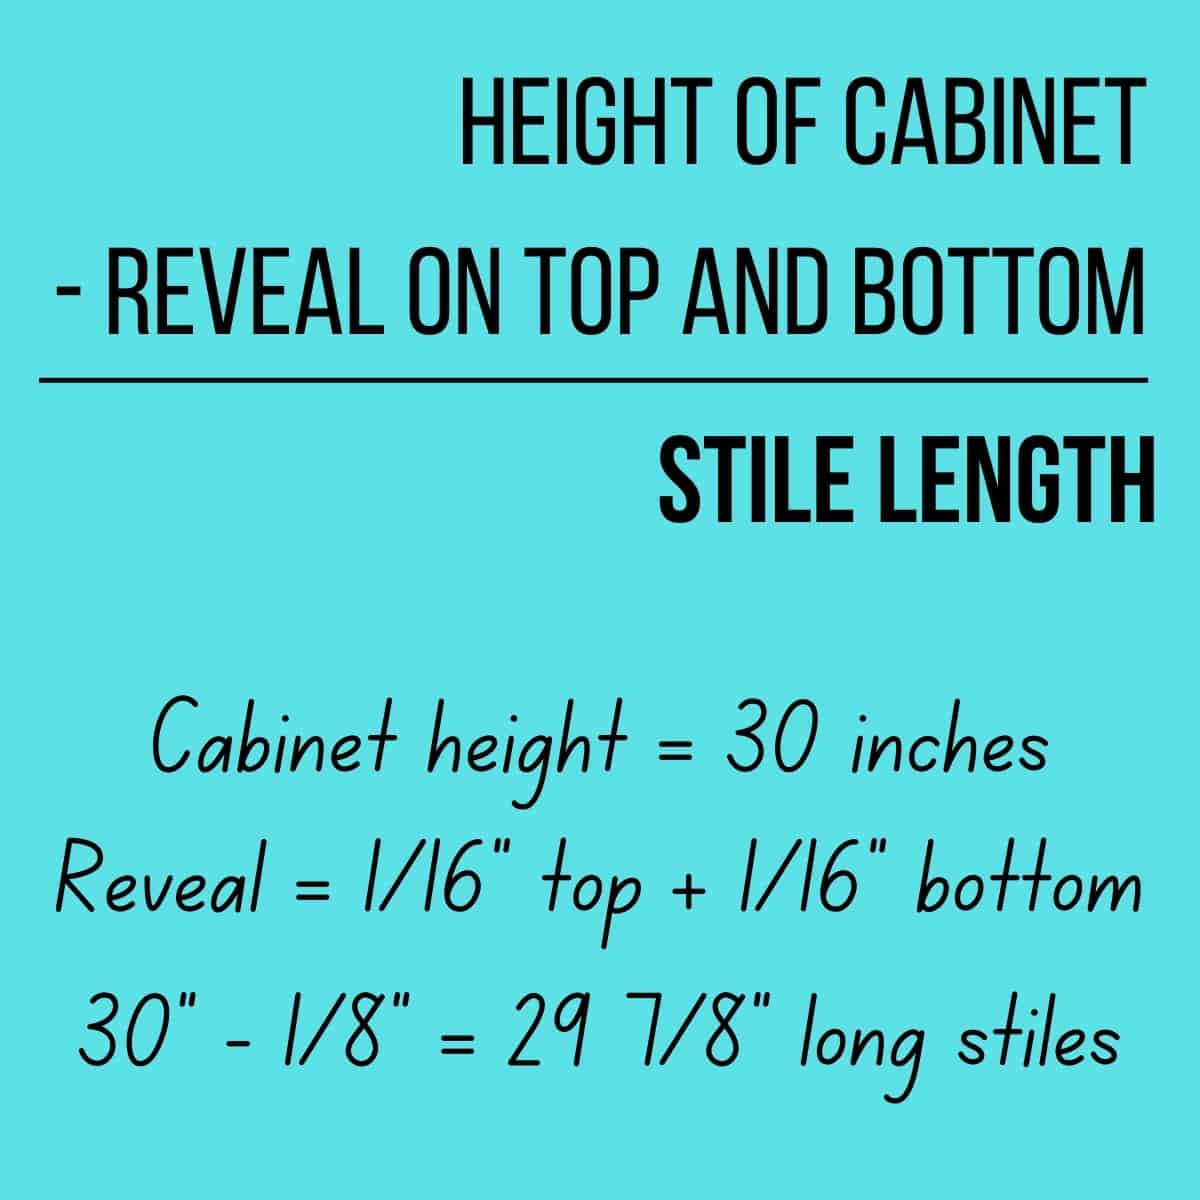 formula for determining stile length: height of cabinet minus reveal of top and bottom = stile length